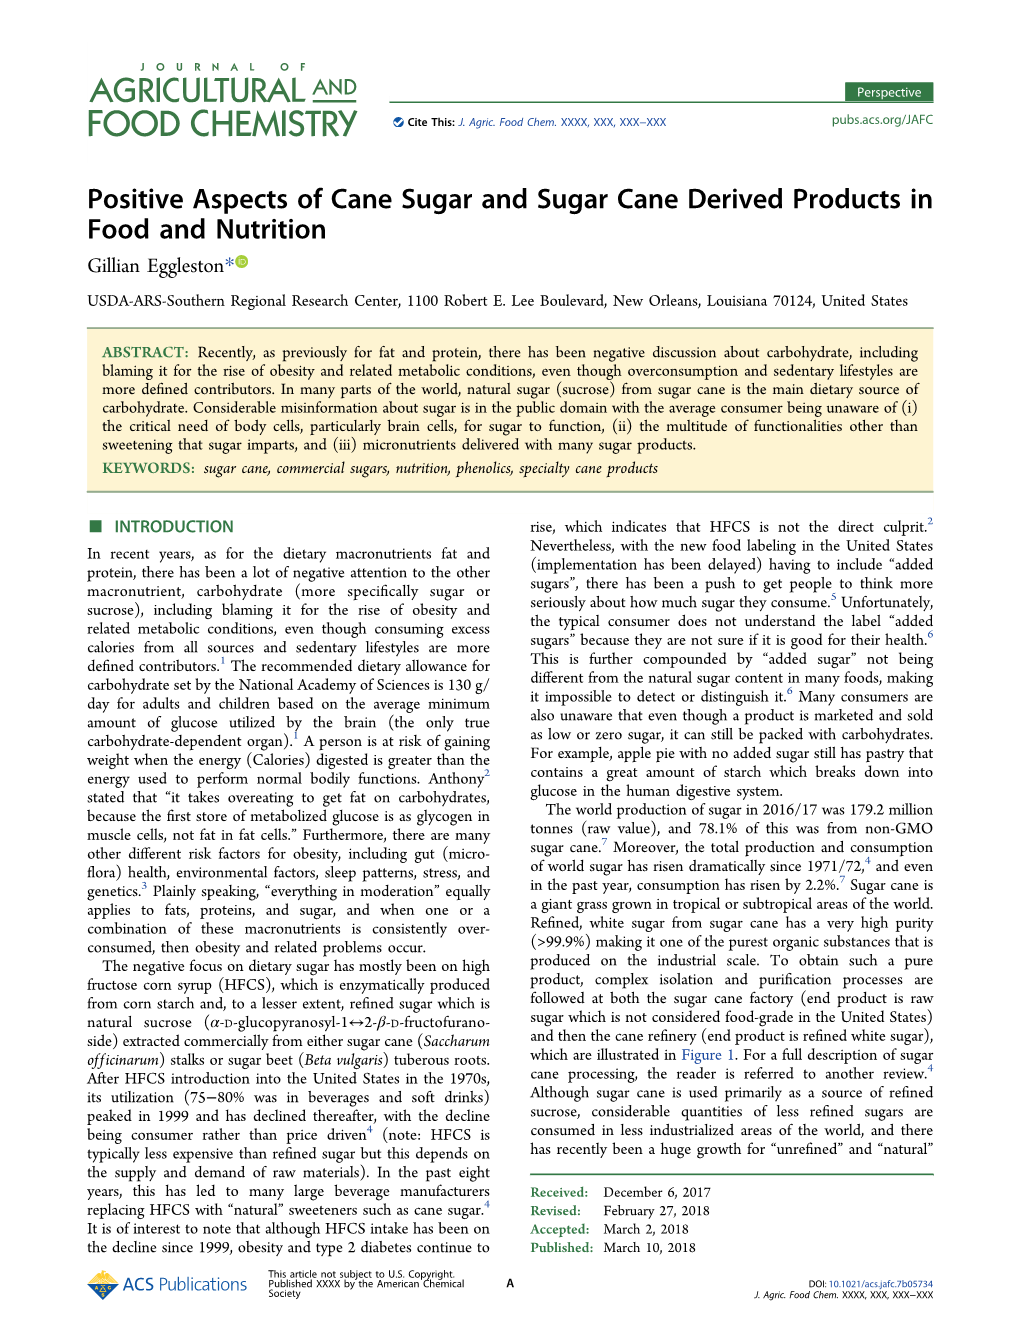 Positive Aspects of Cane Sugar and Sugar Cane Derived Products in Food and Nutrition Gillian Eggleston* USDA-ARS-Southern Regional Research Center, 1100 Robert E